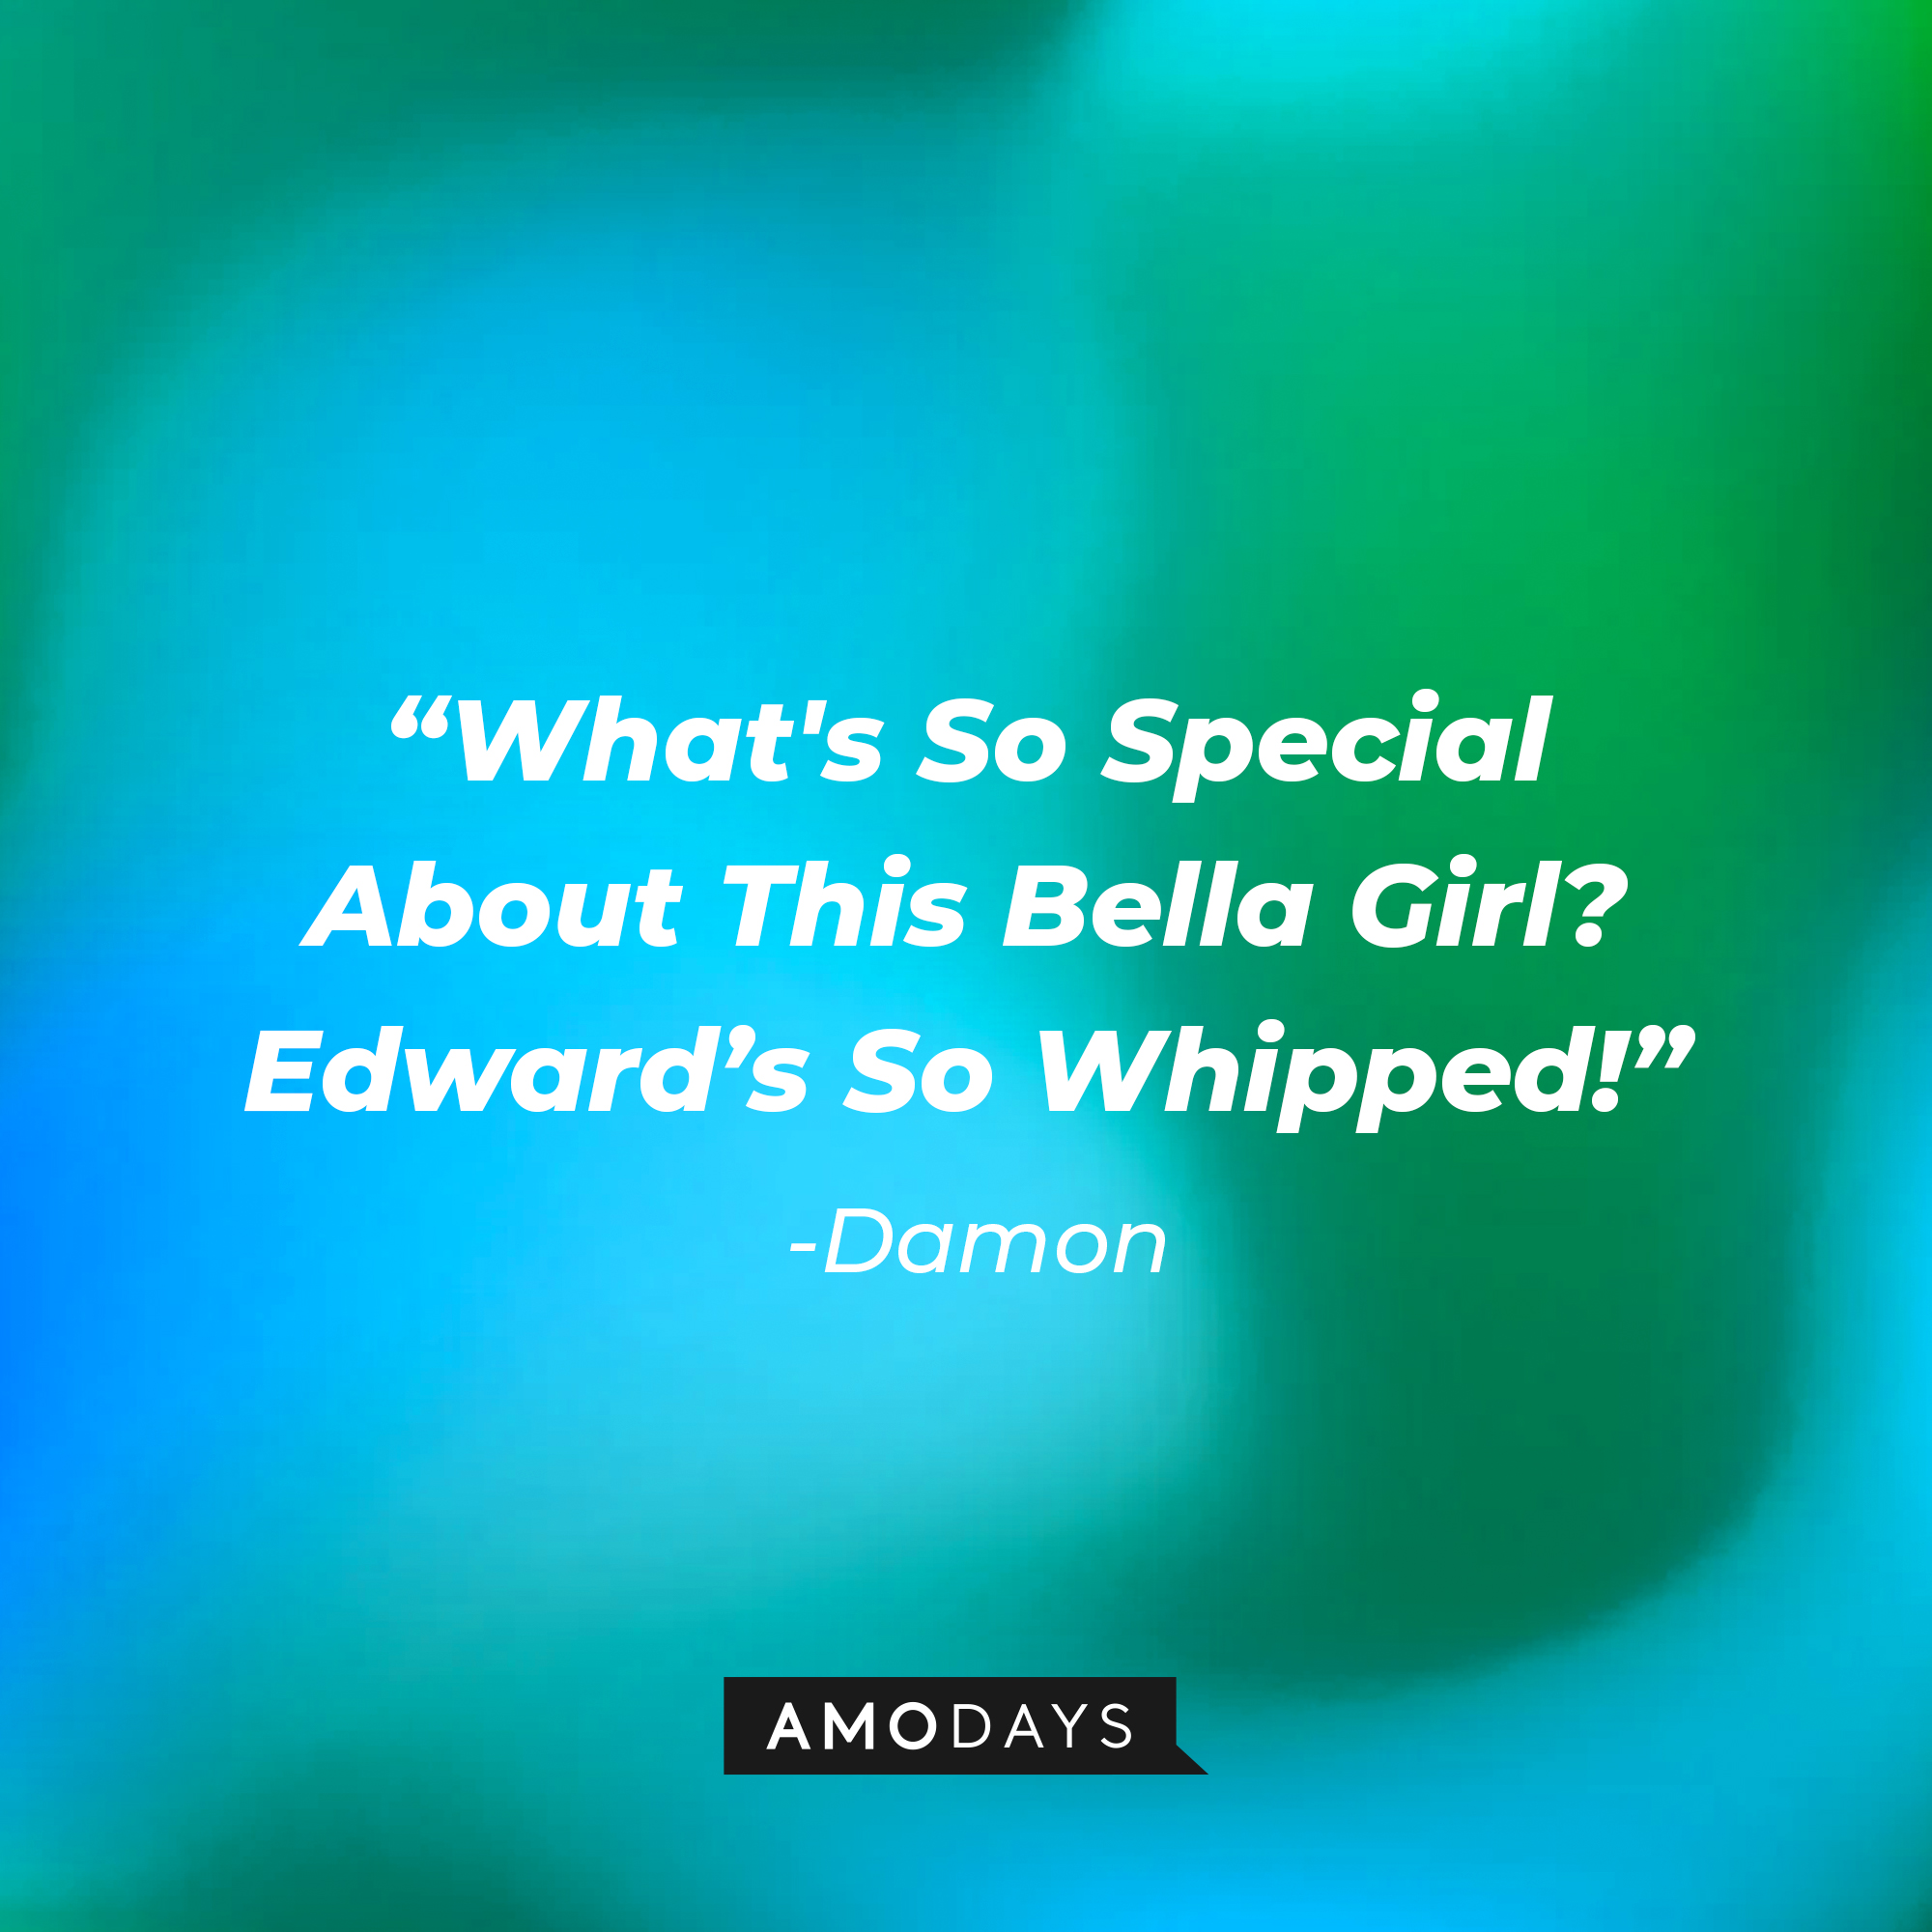 Damon's quote: "What's So Special About This Bella Girl? Edward's So Whipped!" | Source: Amodays